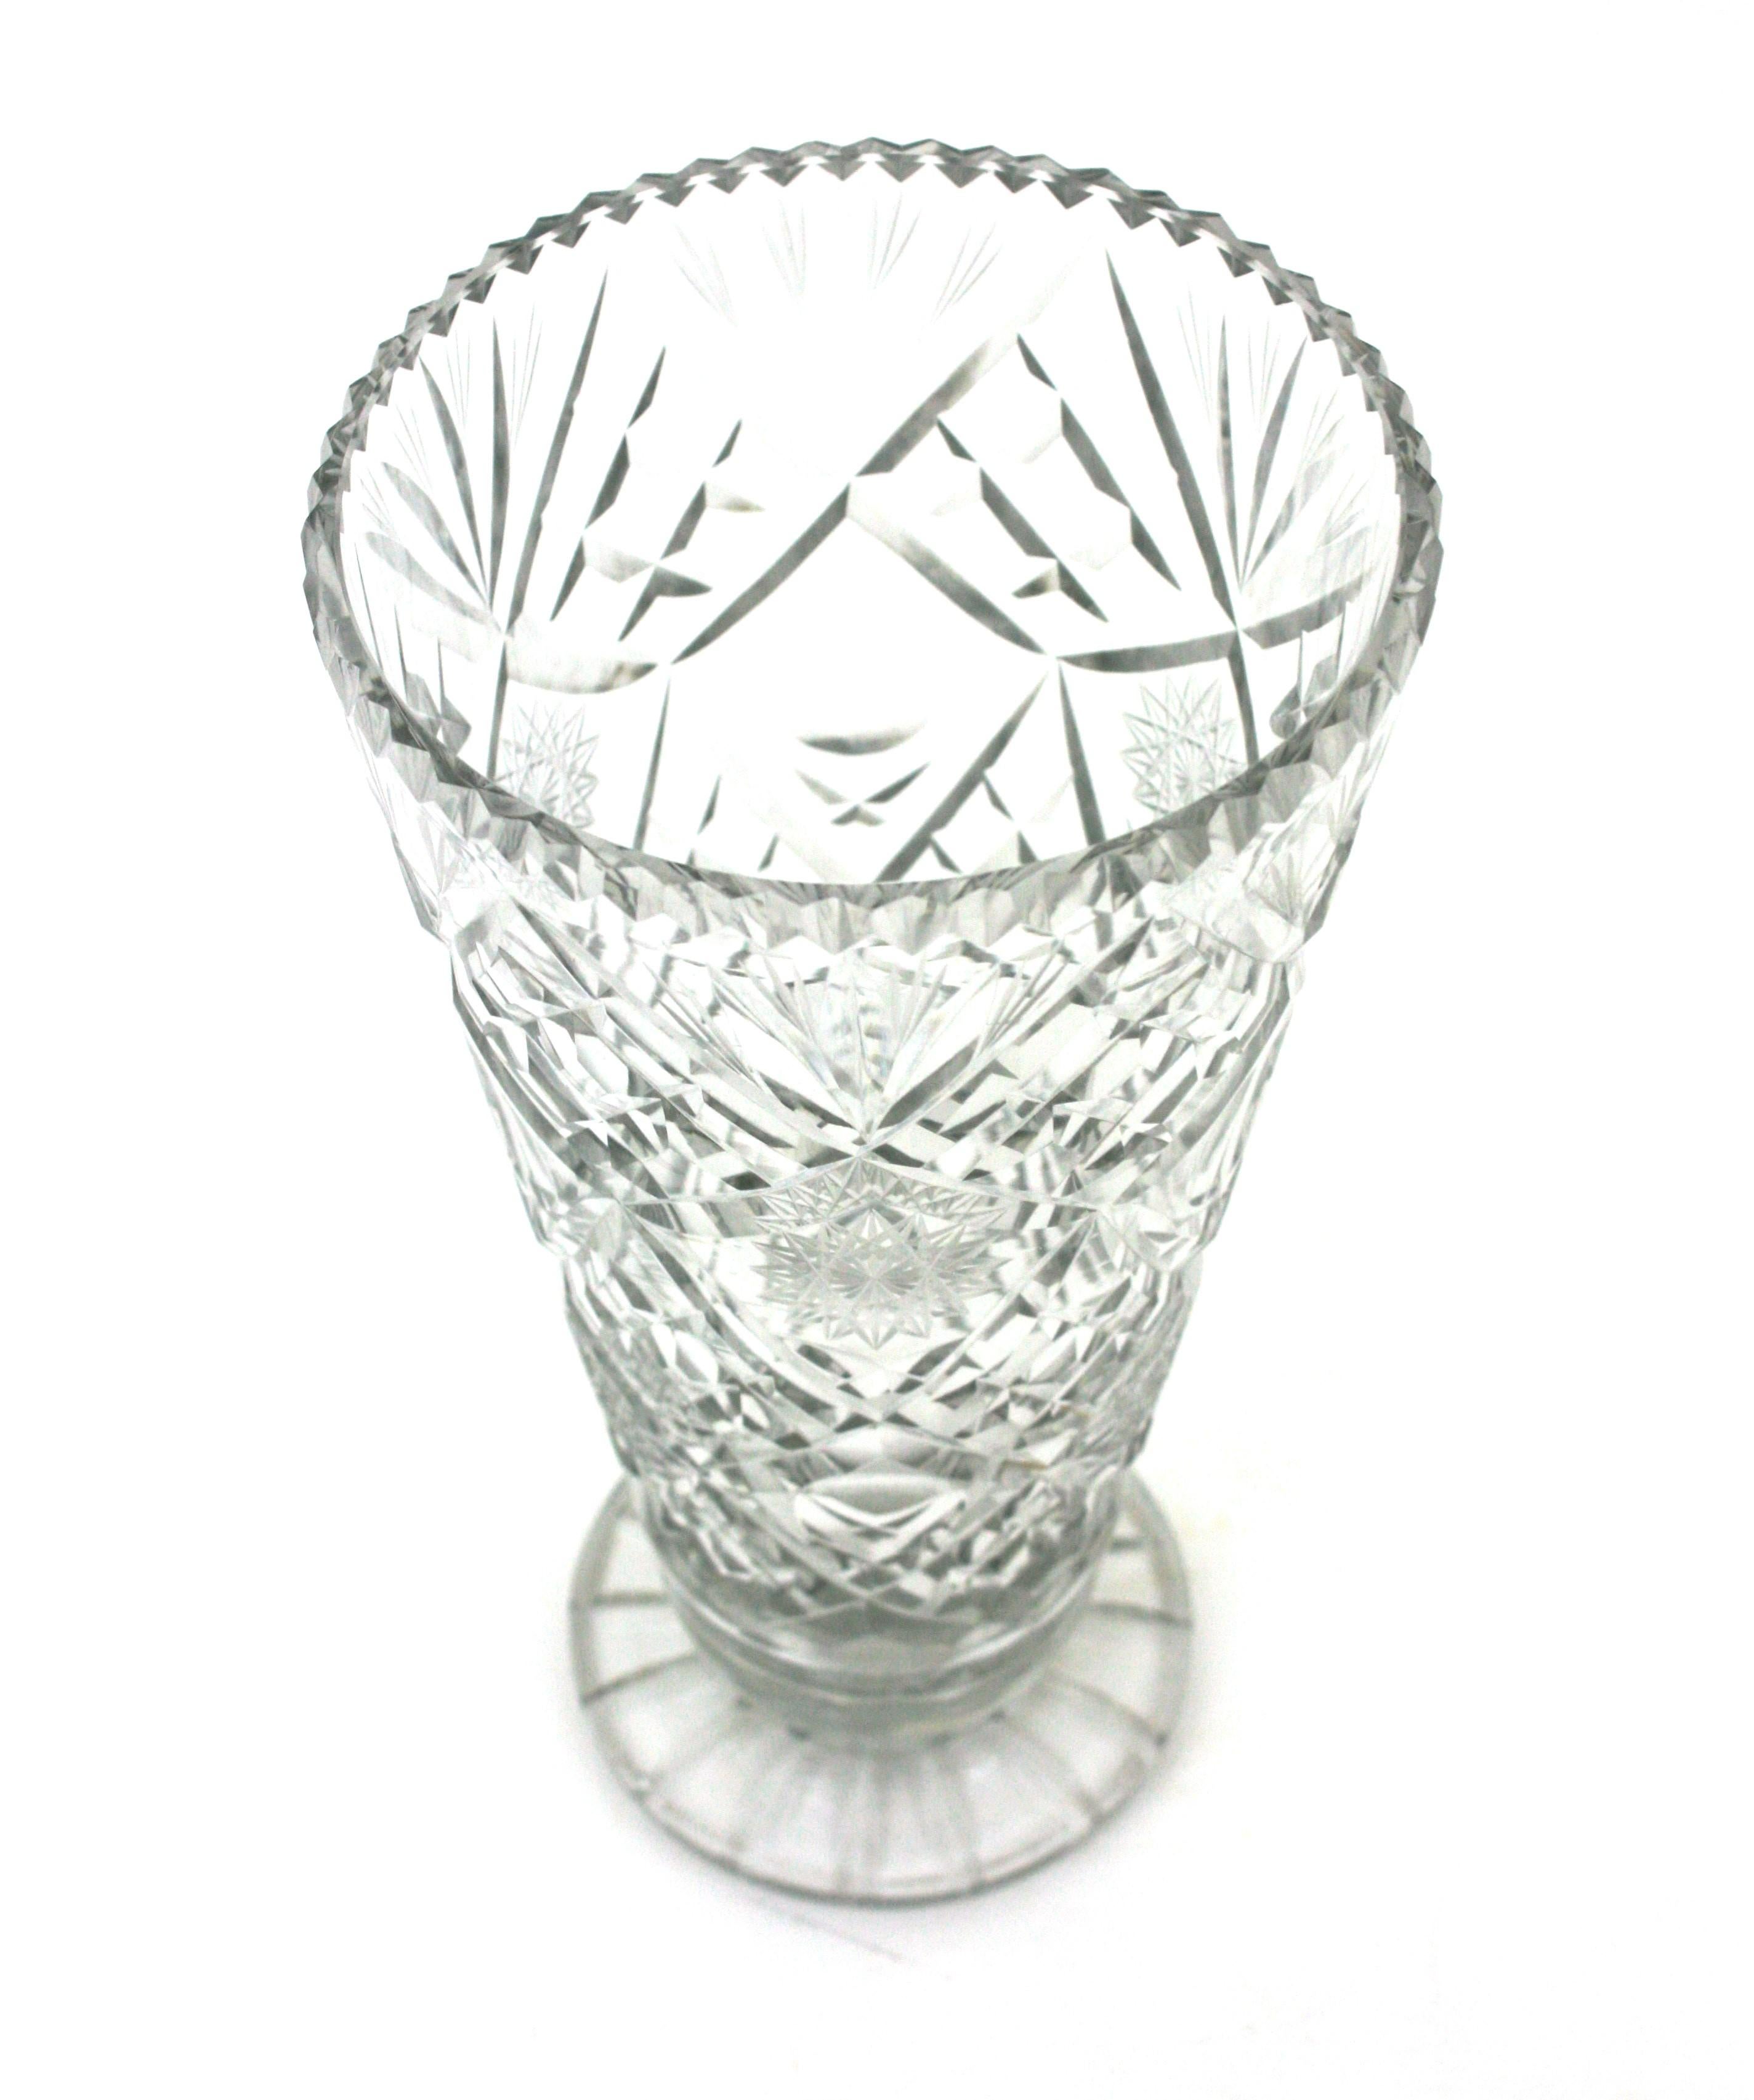 Unmatching Pair of Cut Crystal Vases or Hurricane Candle Holders For Sale 3